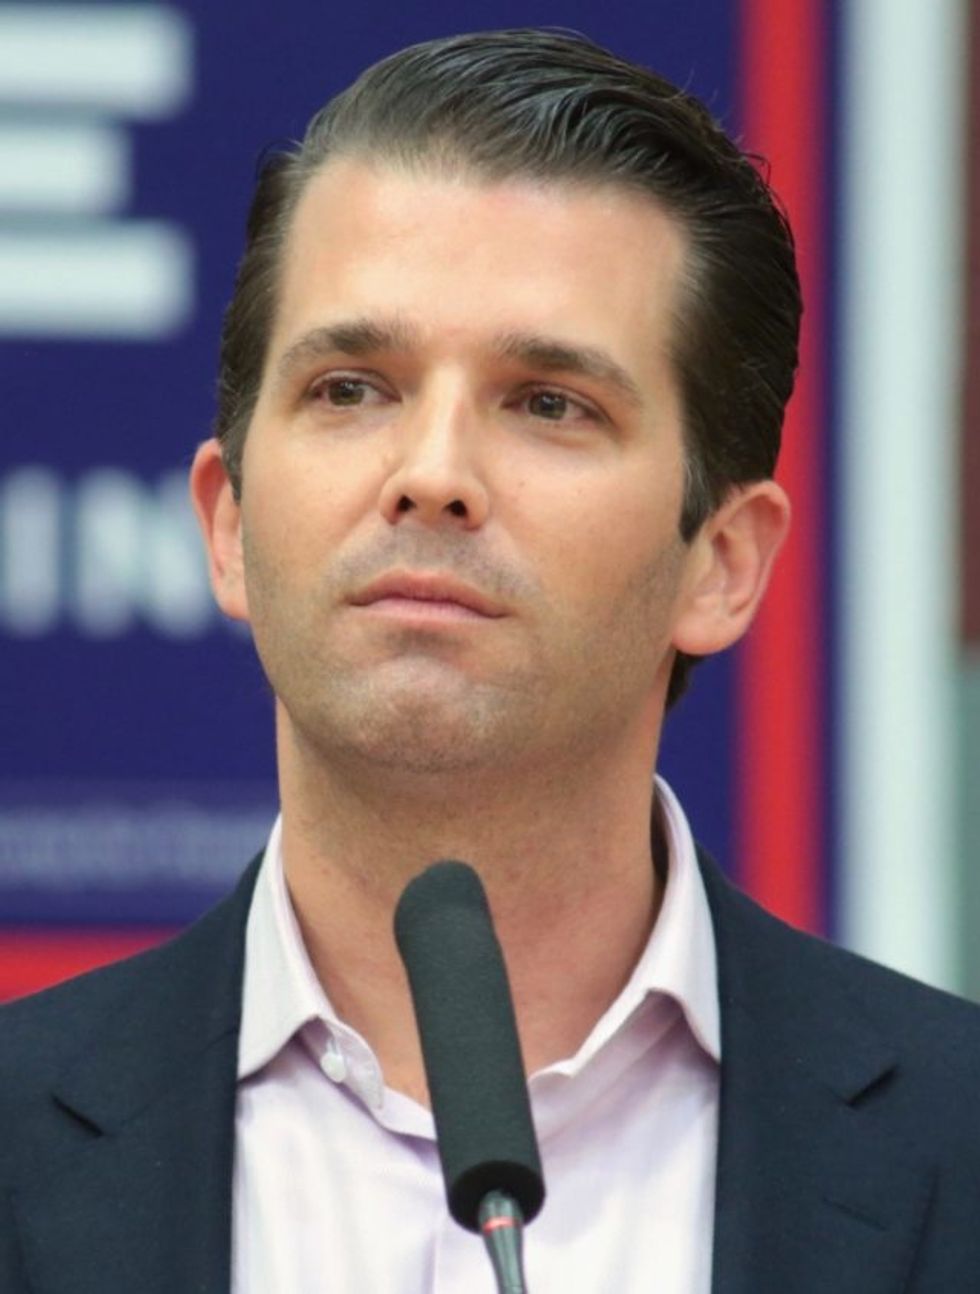 Don Jr. Displays Rifle With ‘Lock Her Up’ And White Nationalist Images